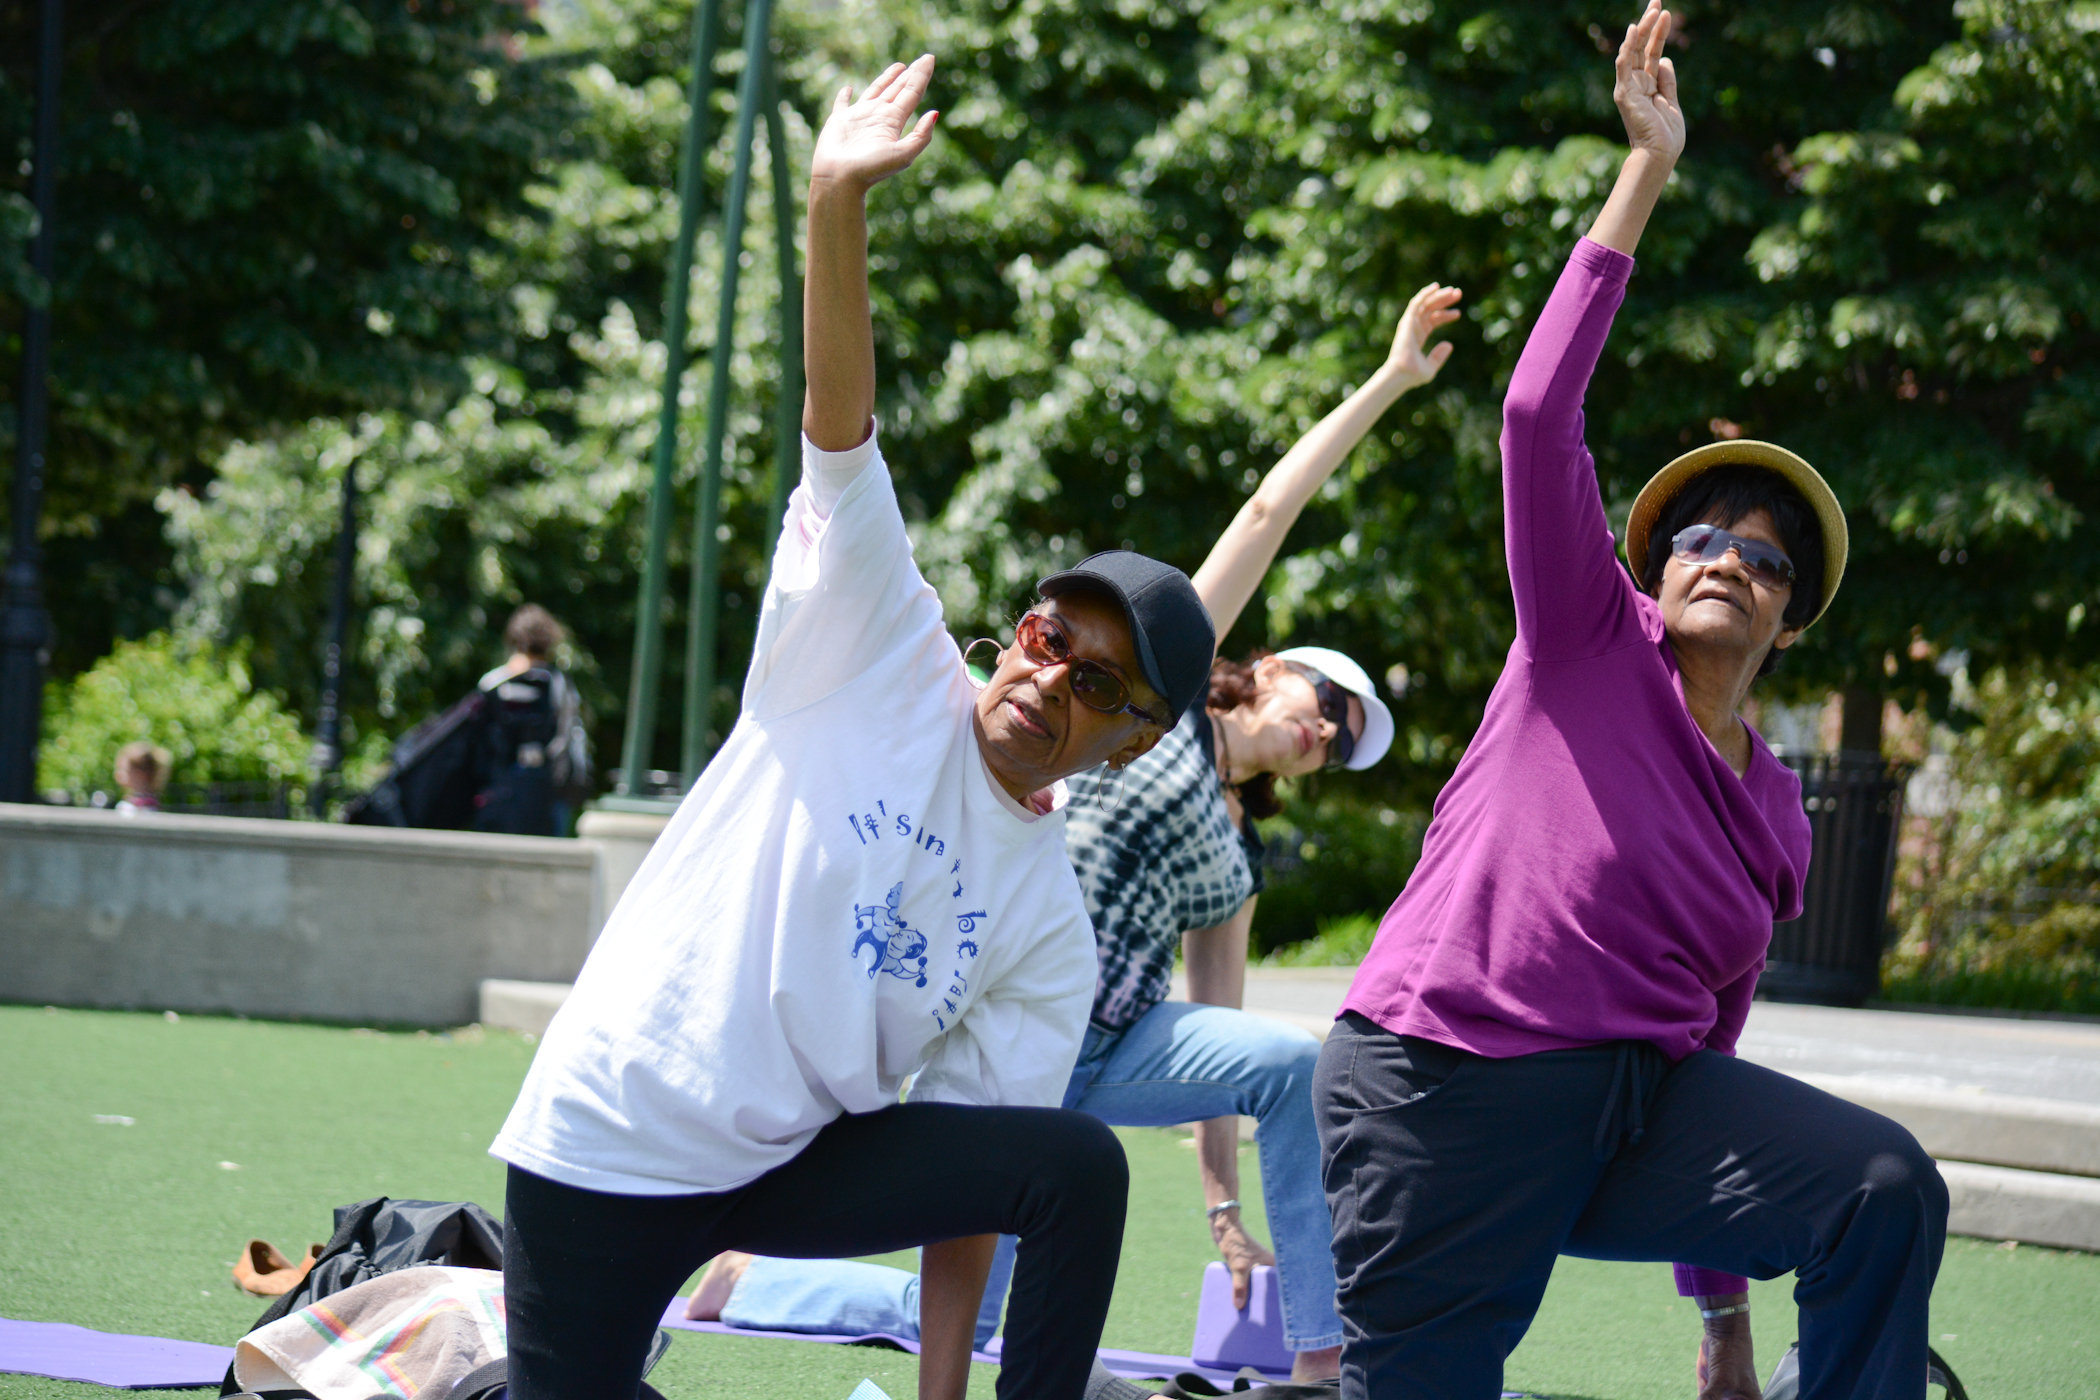 City Parks Foundation Kicks-Off Free Fall Sports Programs For NYC Youth In Addition To Seniors Fitness Programs